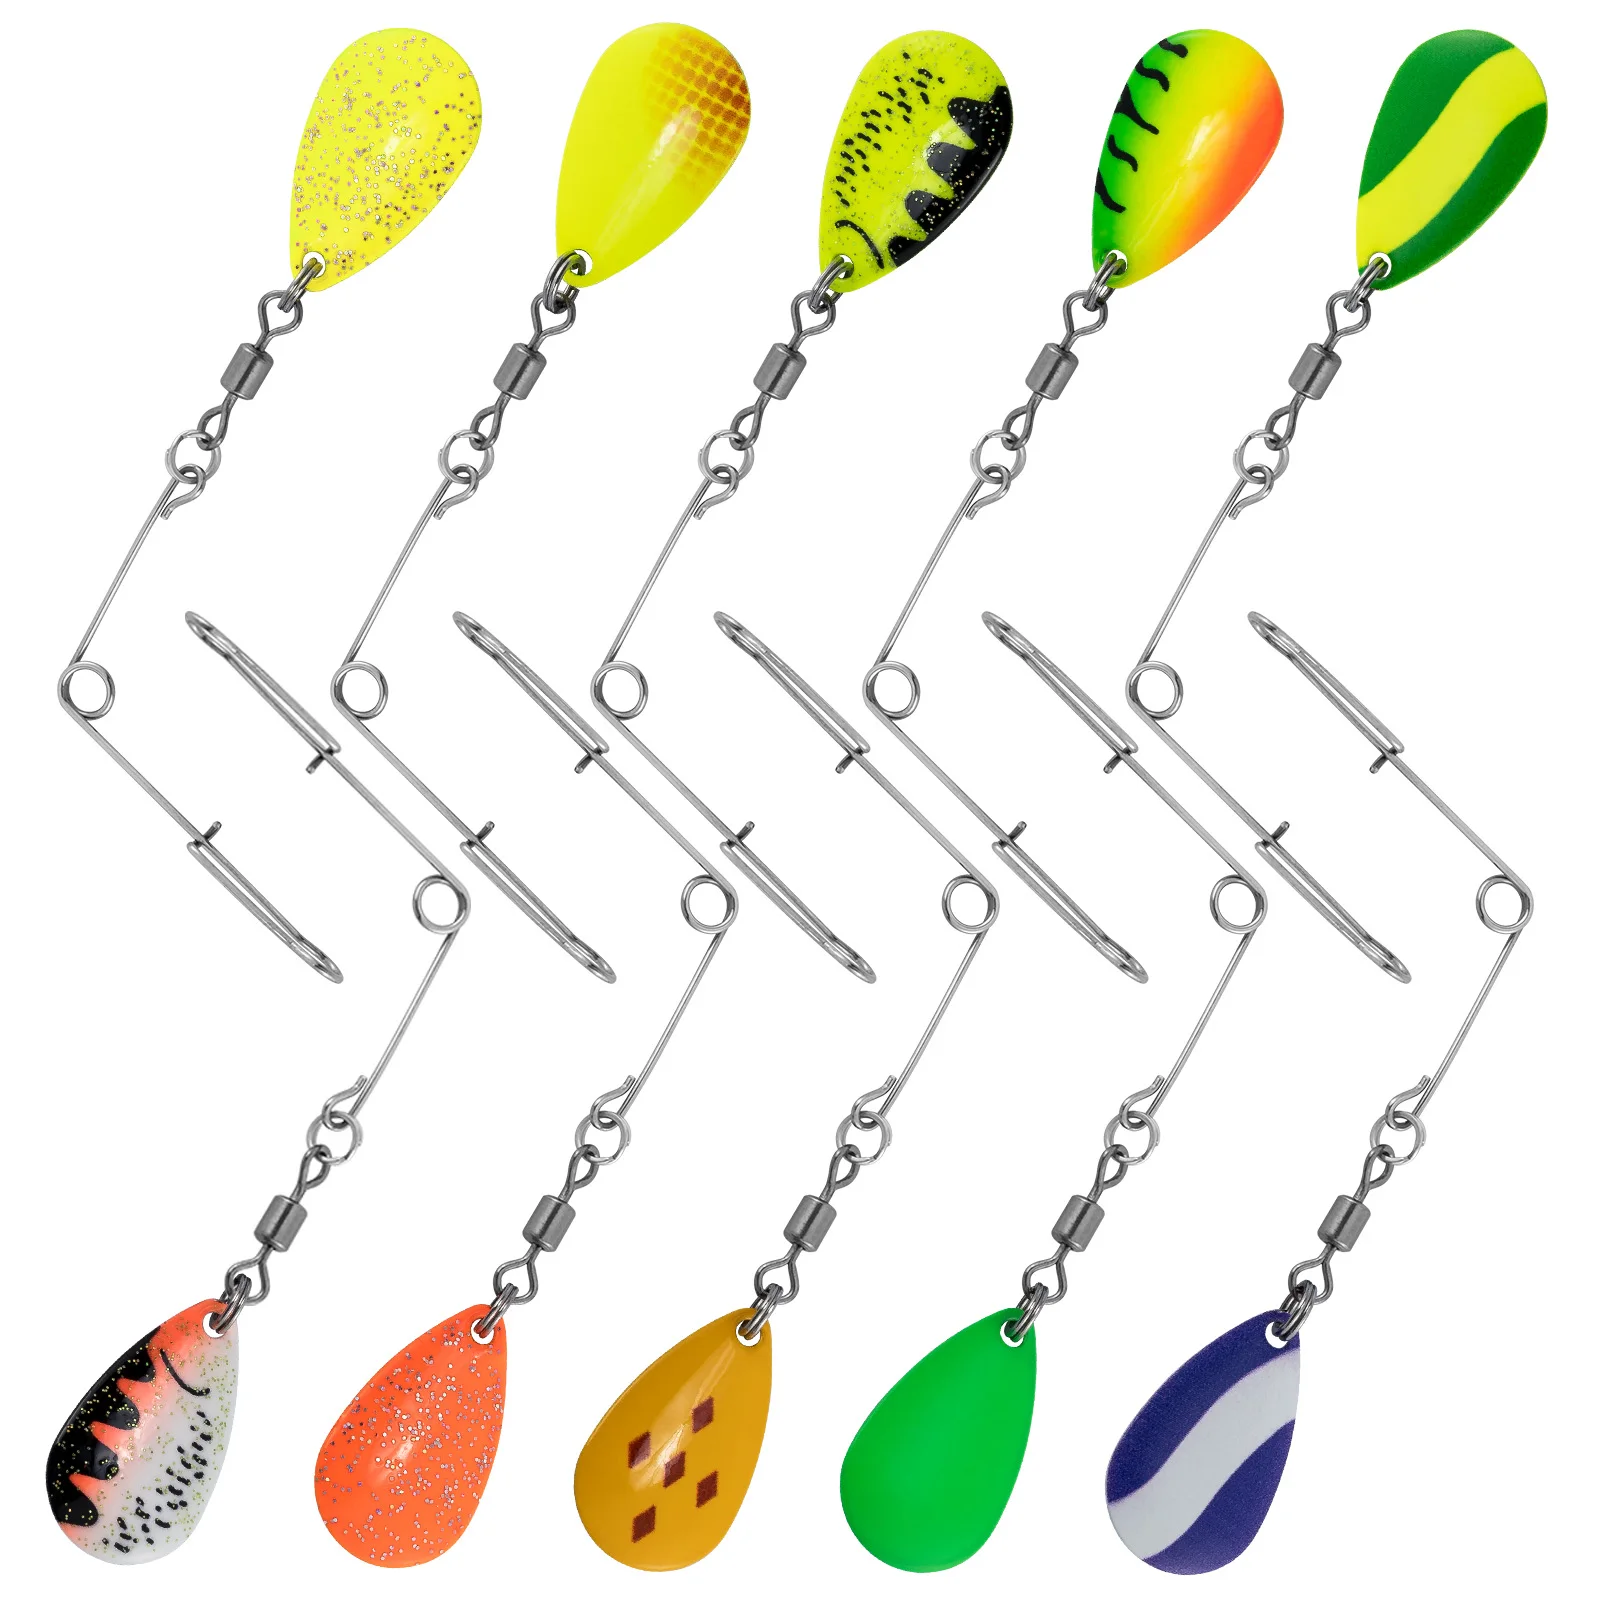 

10pcs Fishing Spinnerbait Lure Making Supplies Colorado Blades Spinner Wire Walleye Rig Crawler Harness Lures Trout Crappie Bass